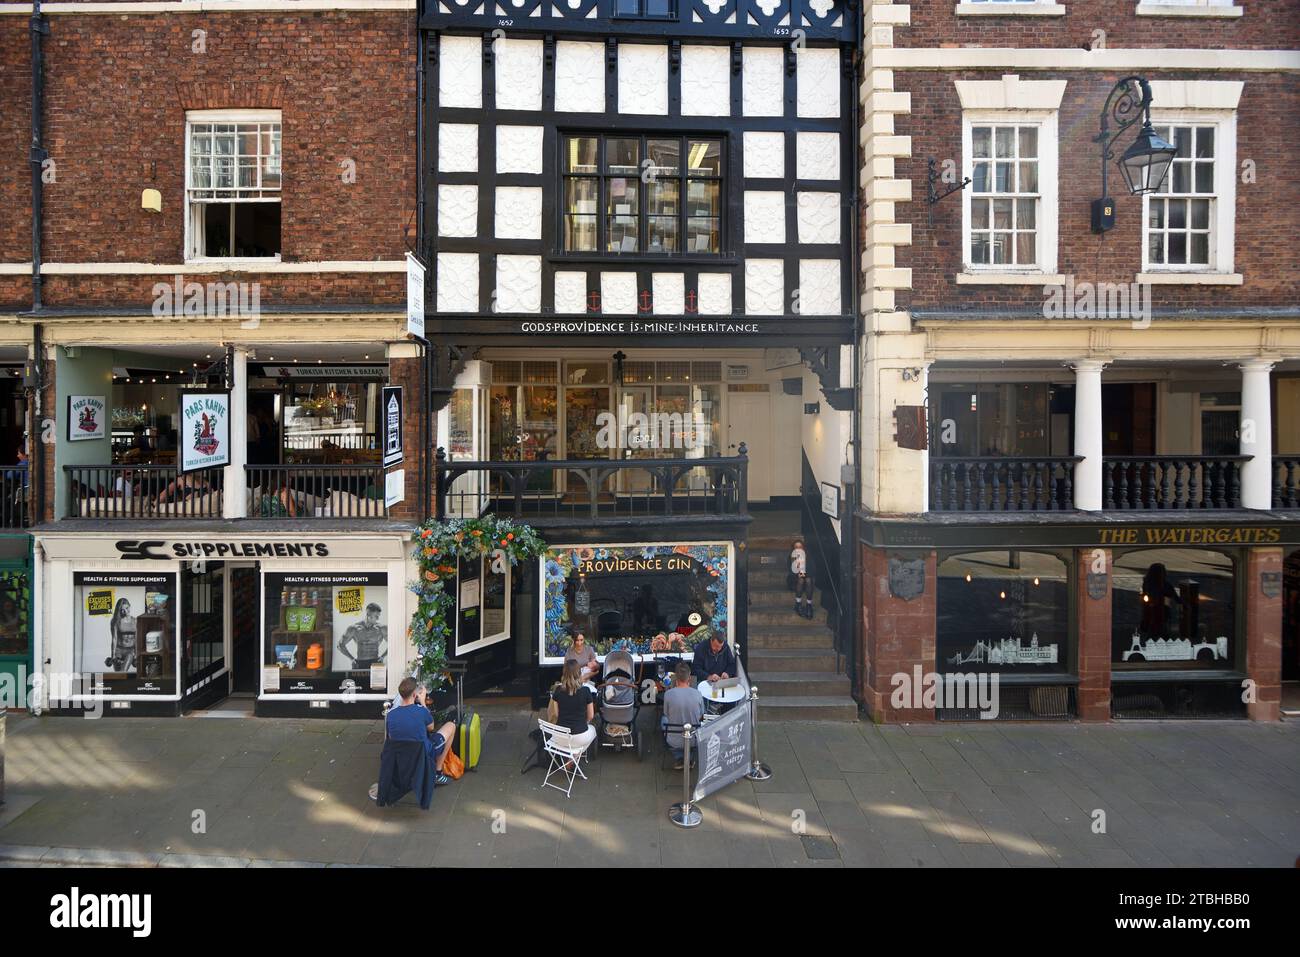 Pavement Cafe & historische Gebäude, God's Providence House, Boutiquen, The Rows Watergate Street Old Town oder Historic District Chester England Stockfoto